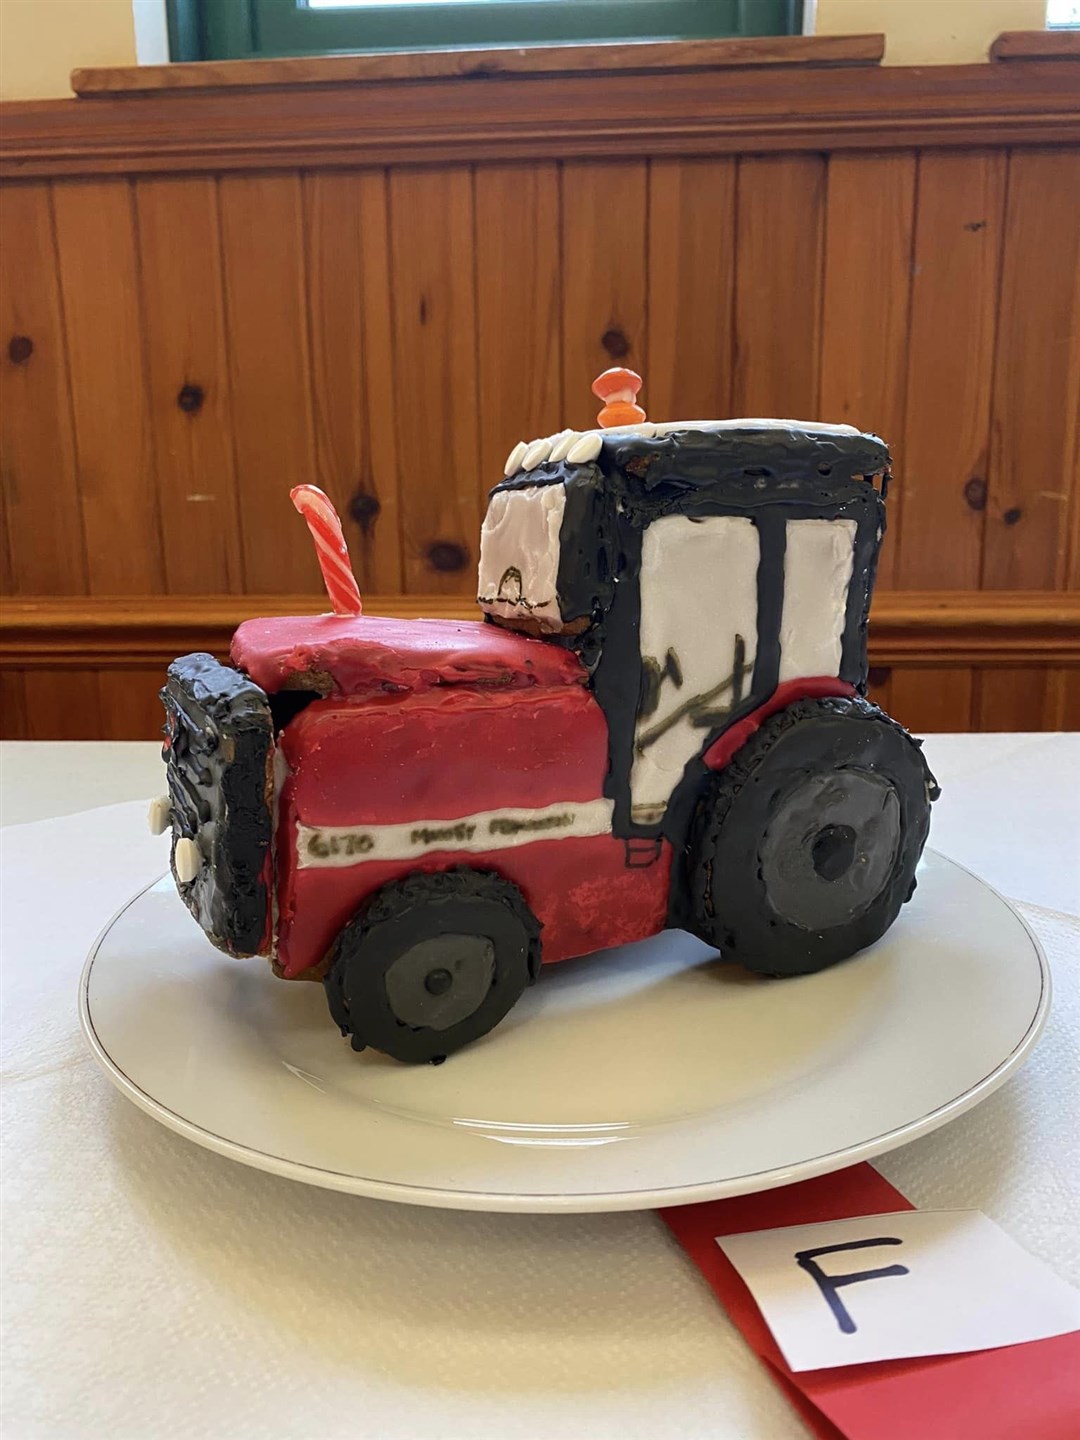 Amanda Cameron's gingerbread tractor came 2nd in the Anything But a House category.